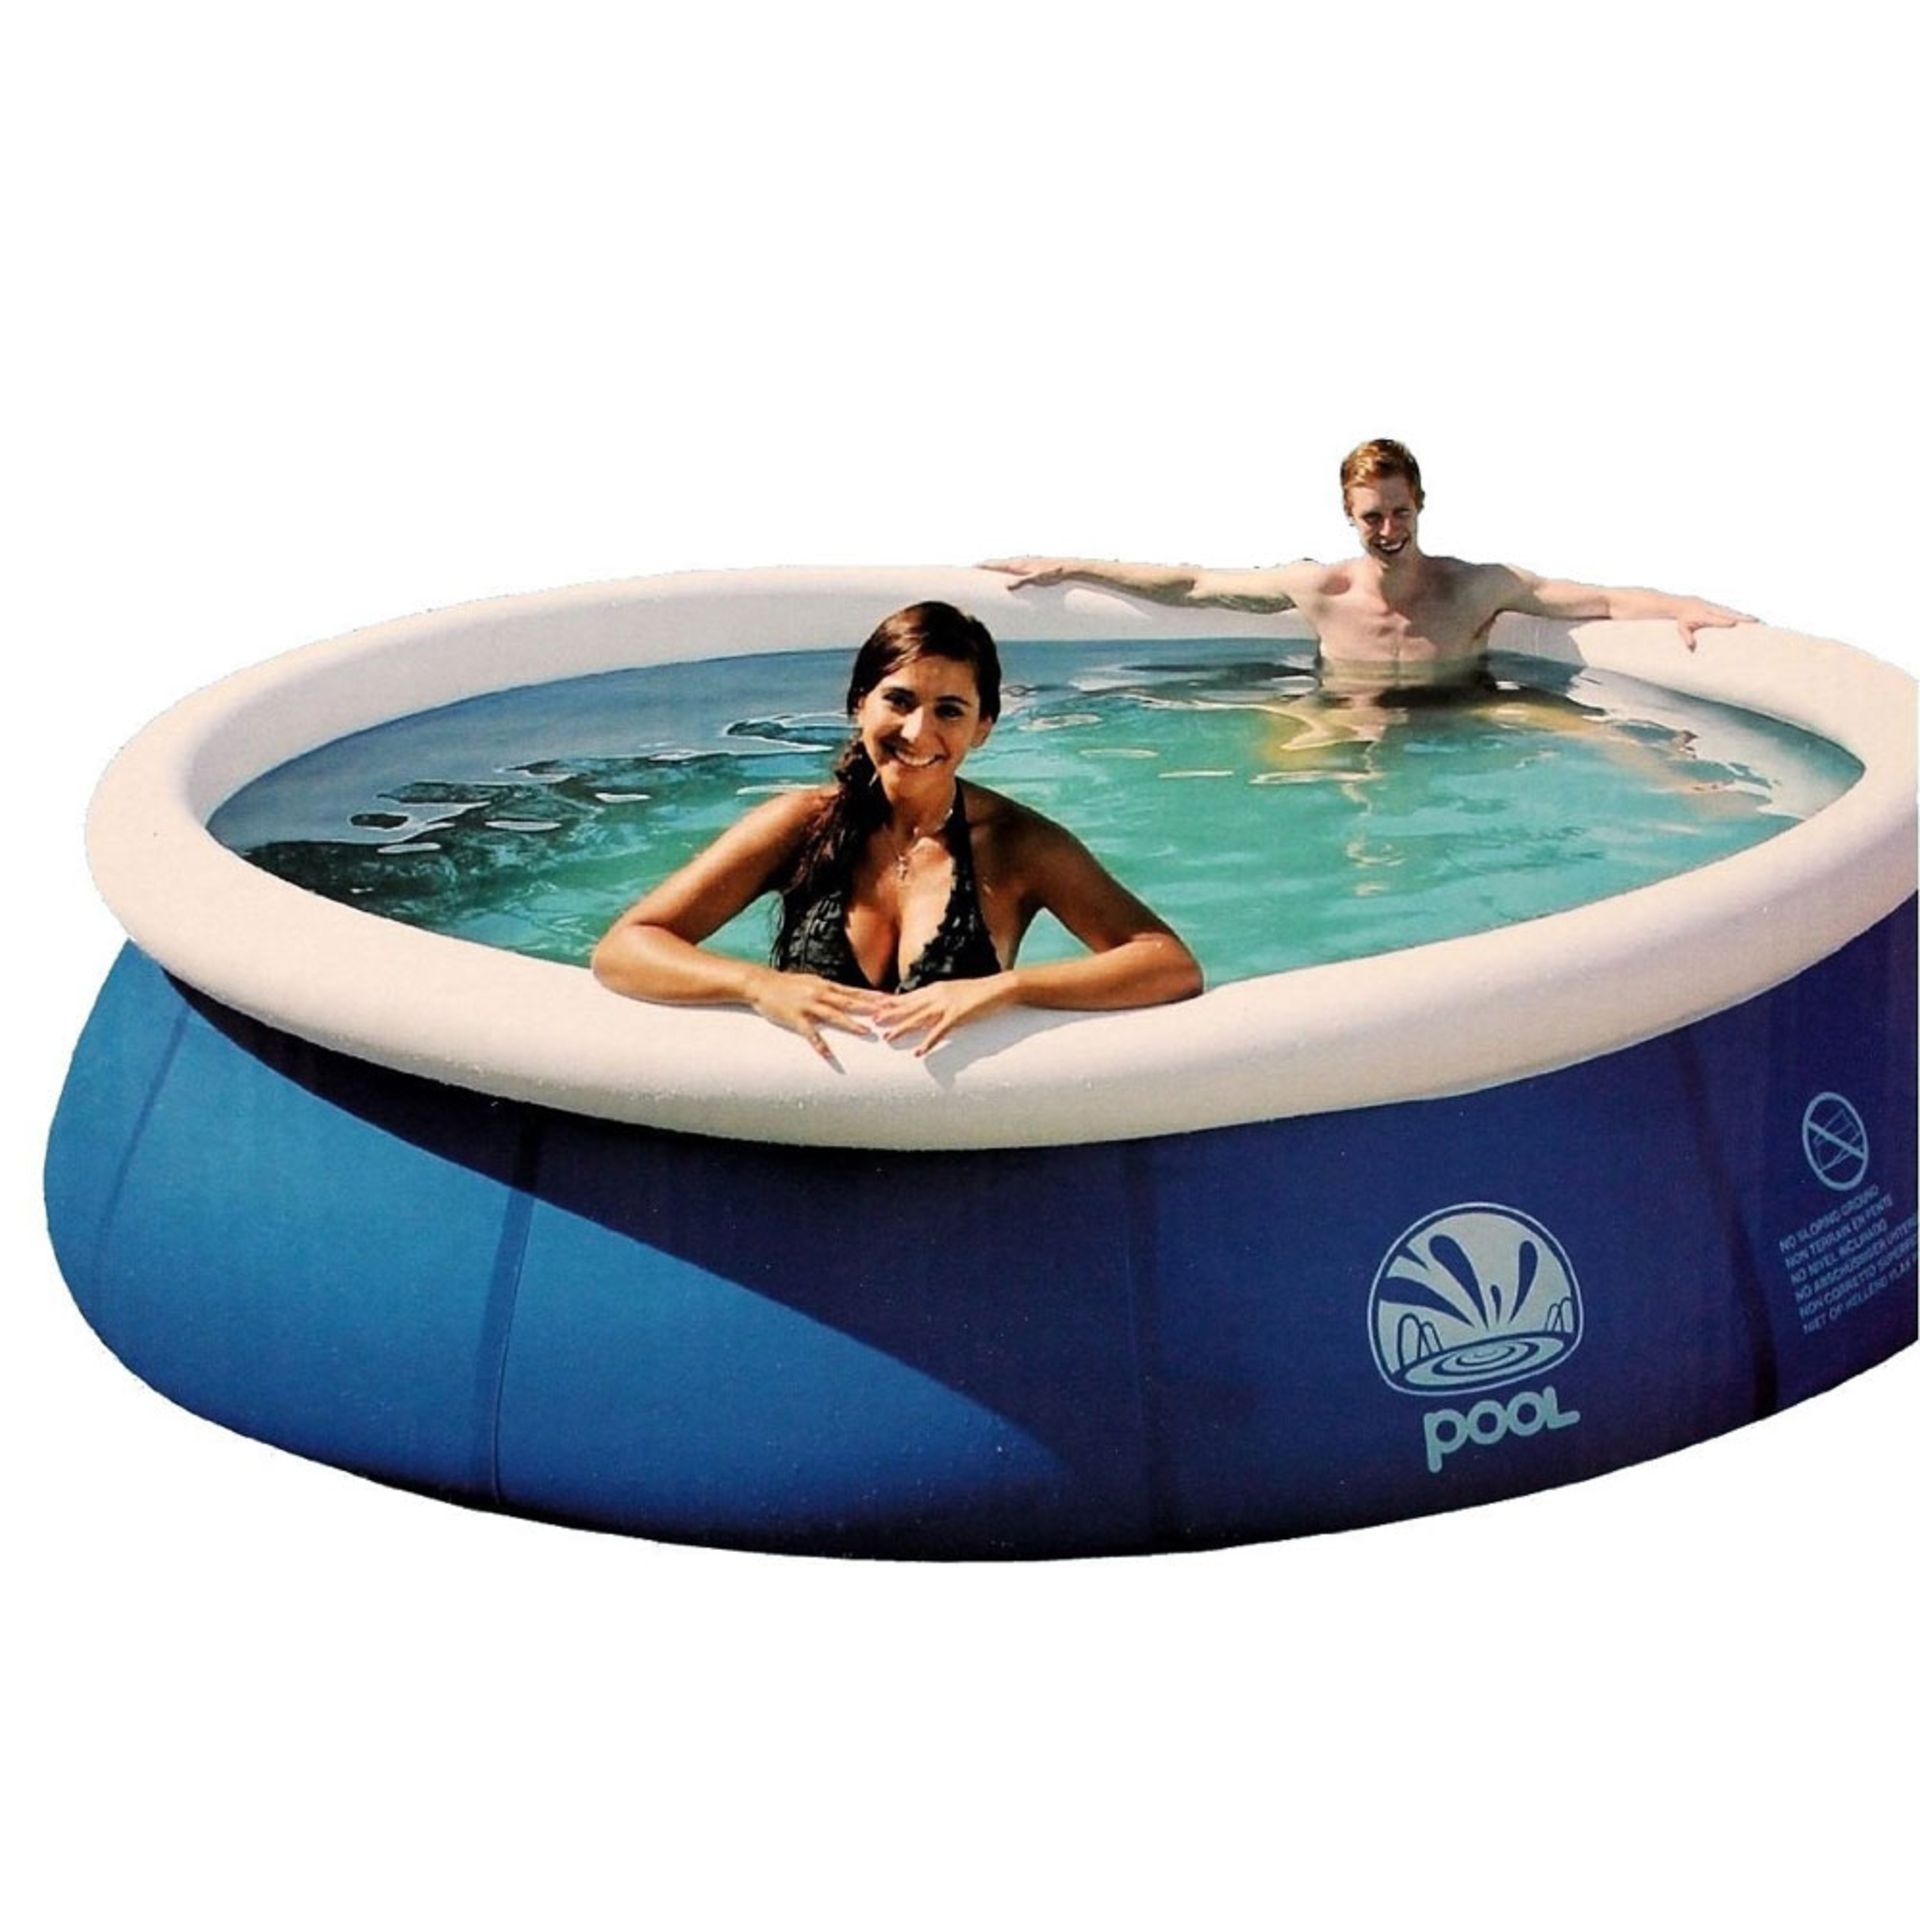 V Brand New 2.4m Quick-up Paddling Pool - Includes Repair Patch - Easy Up Construction - Fast